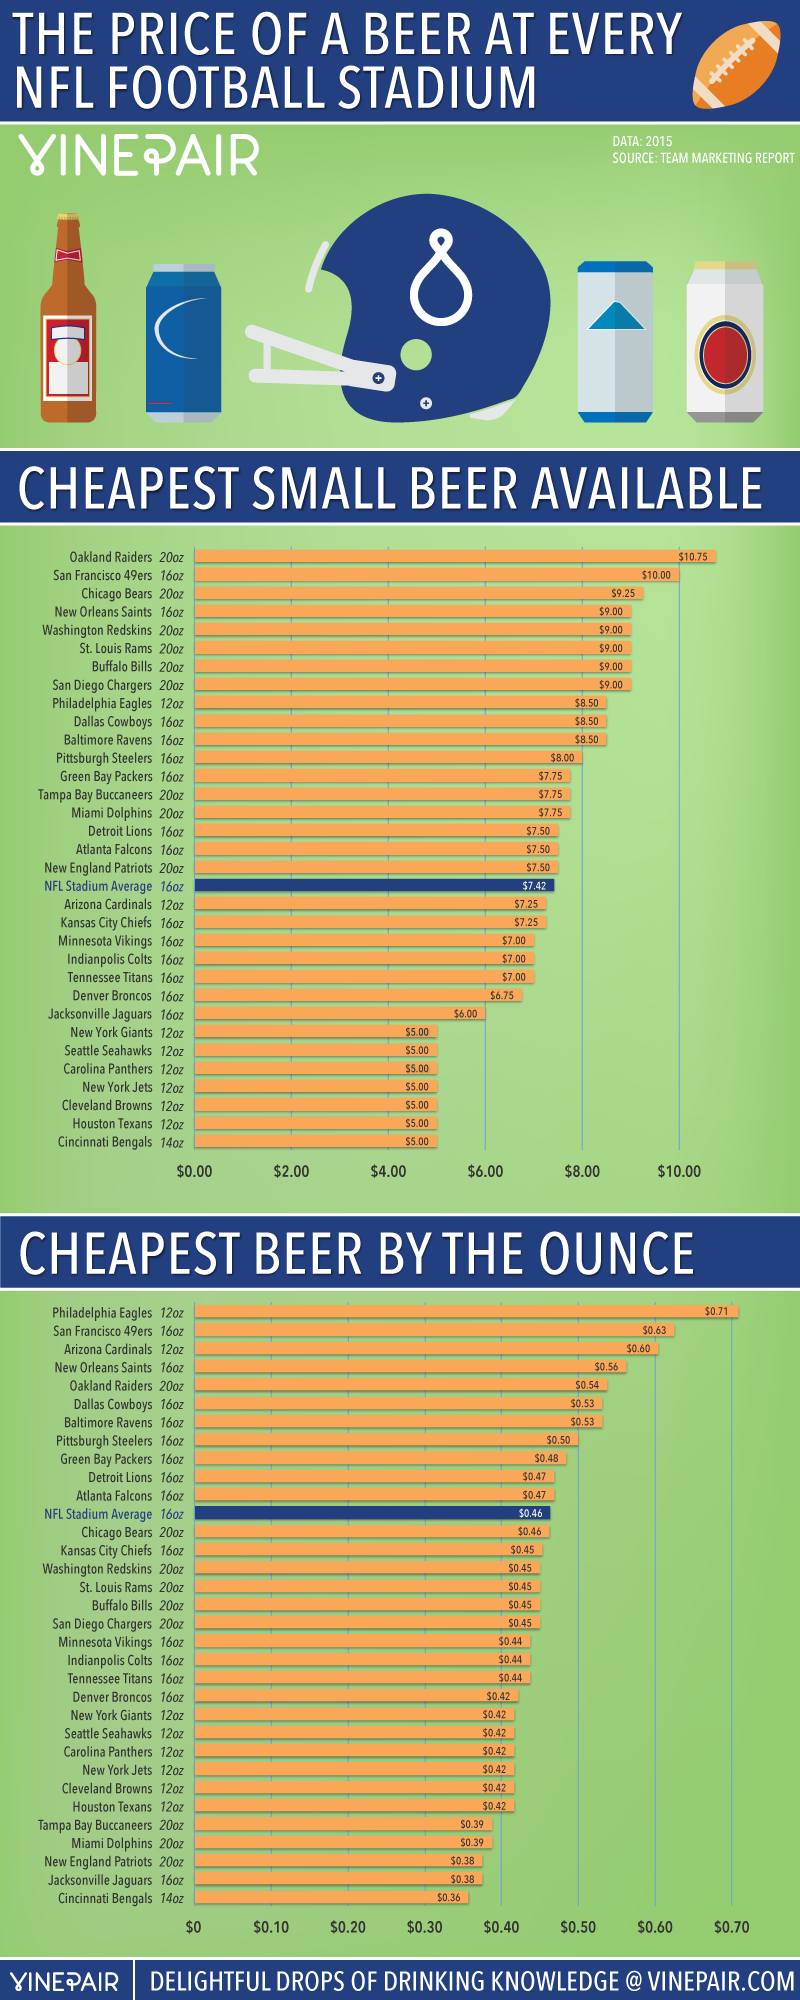 The Price Of A Beer At Every NFL Football Stadium In 2015